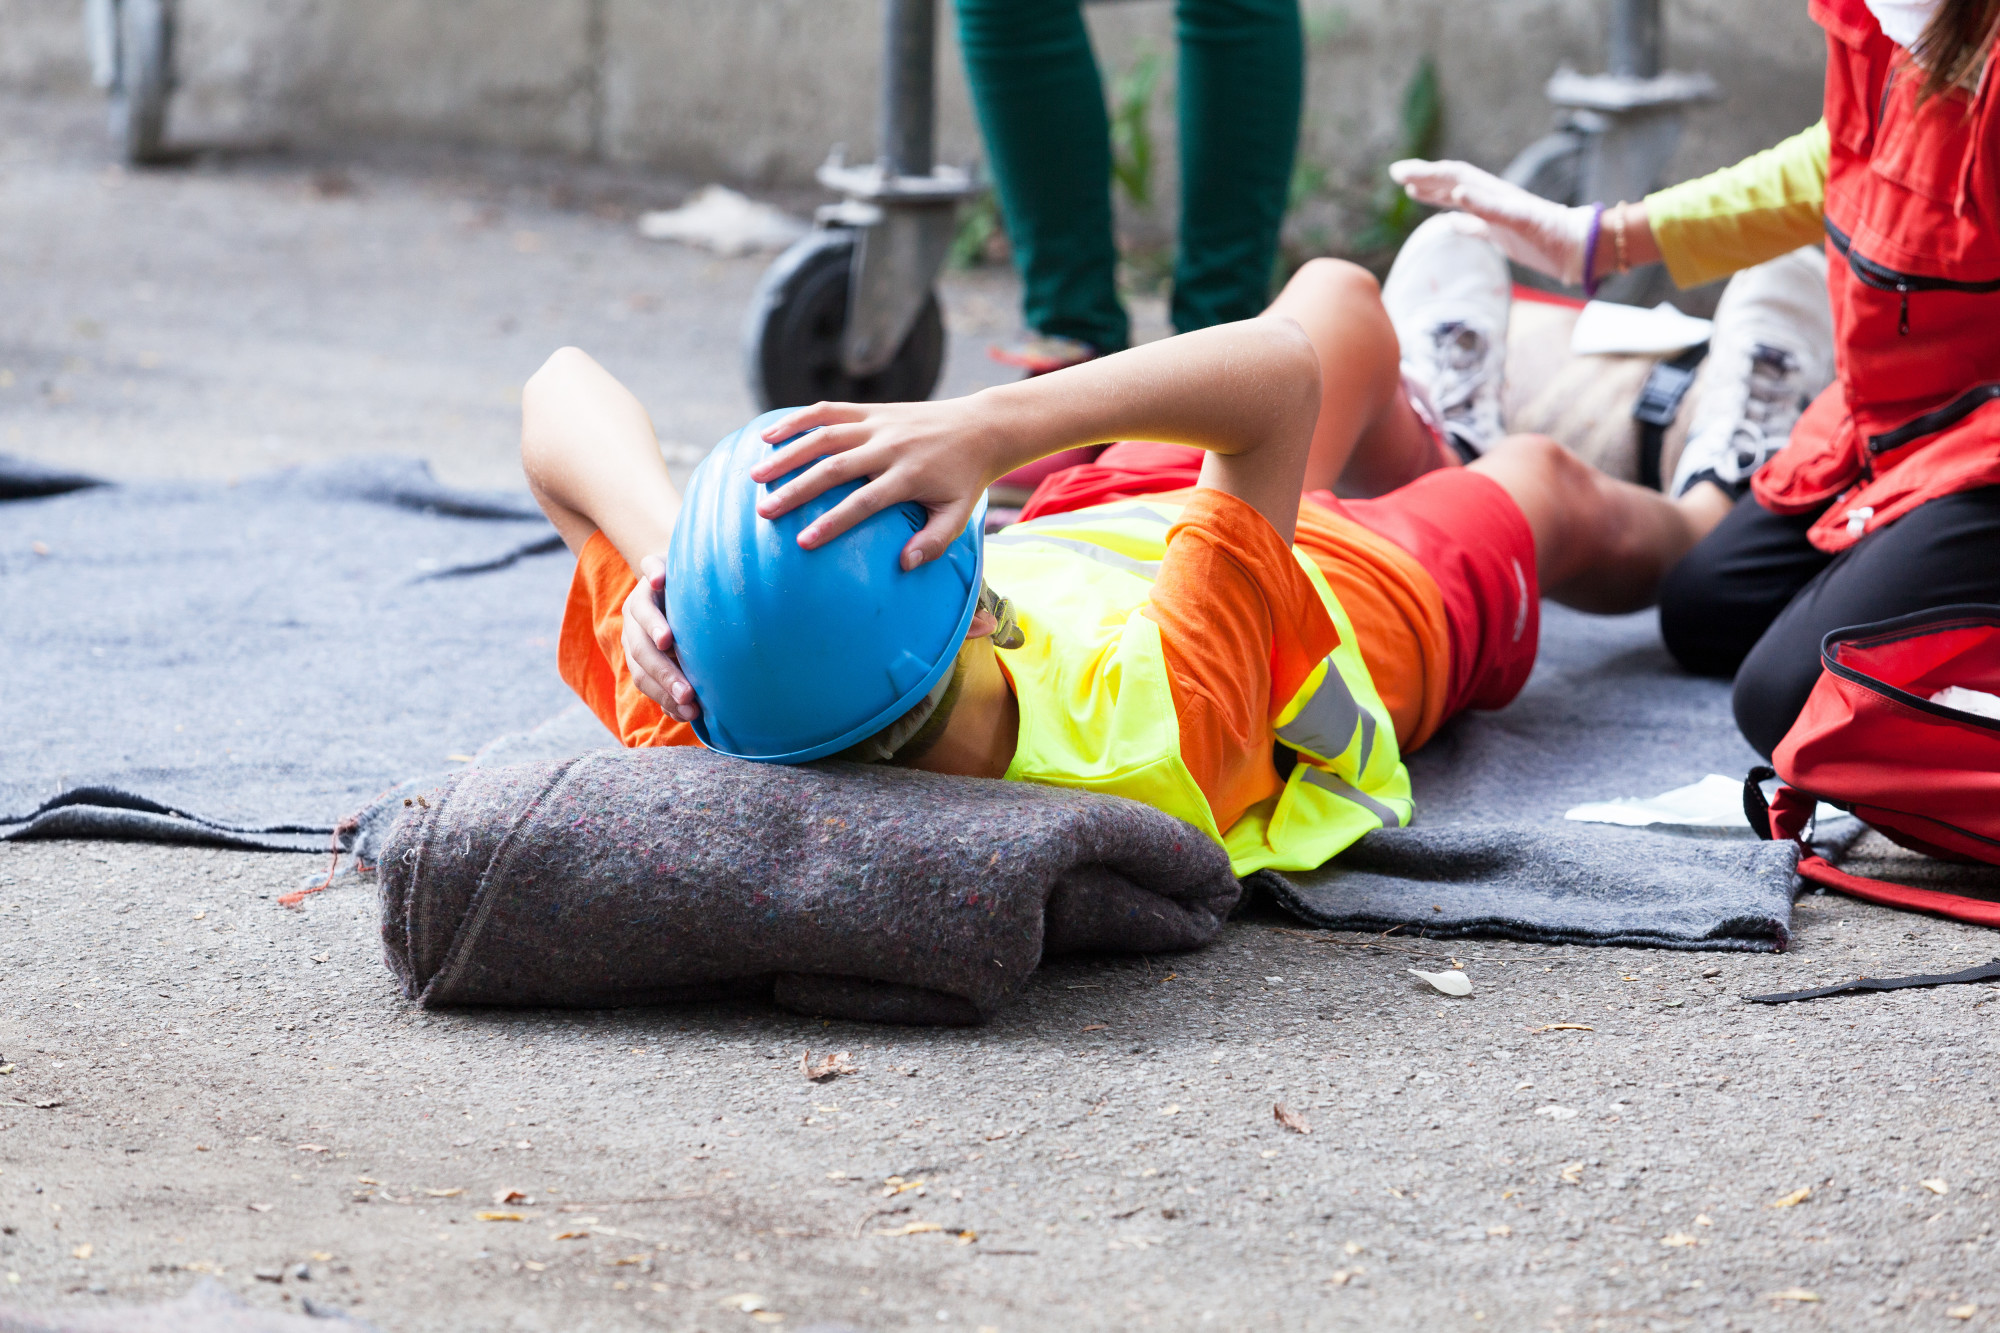 What Are the Common Causes of Workplace Accidents?